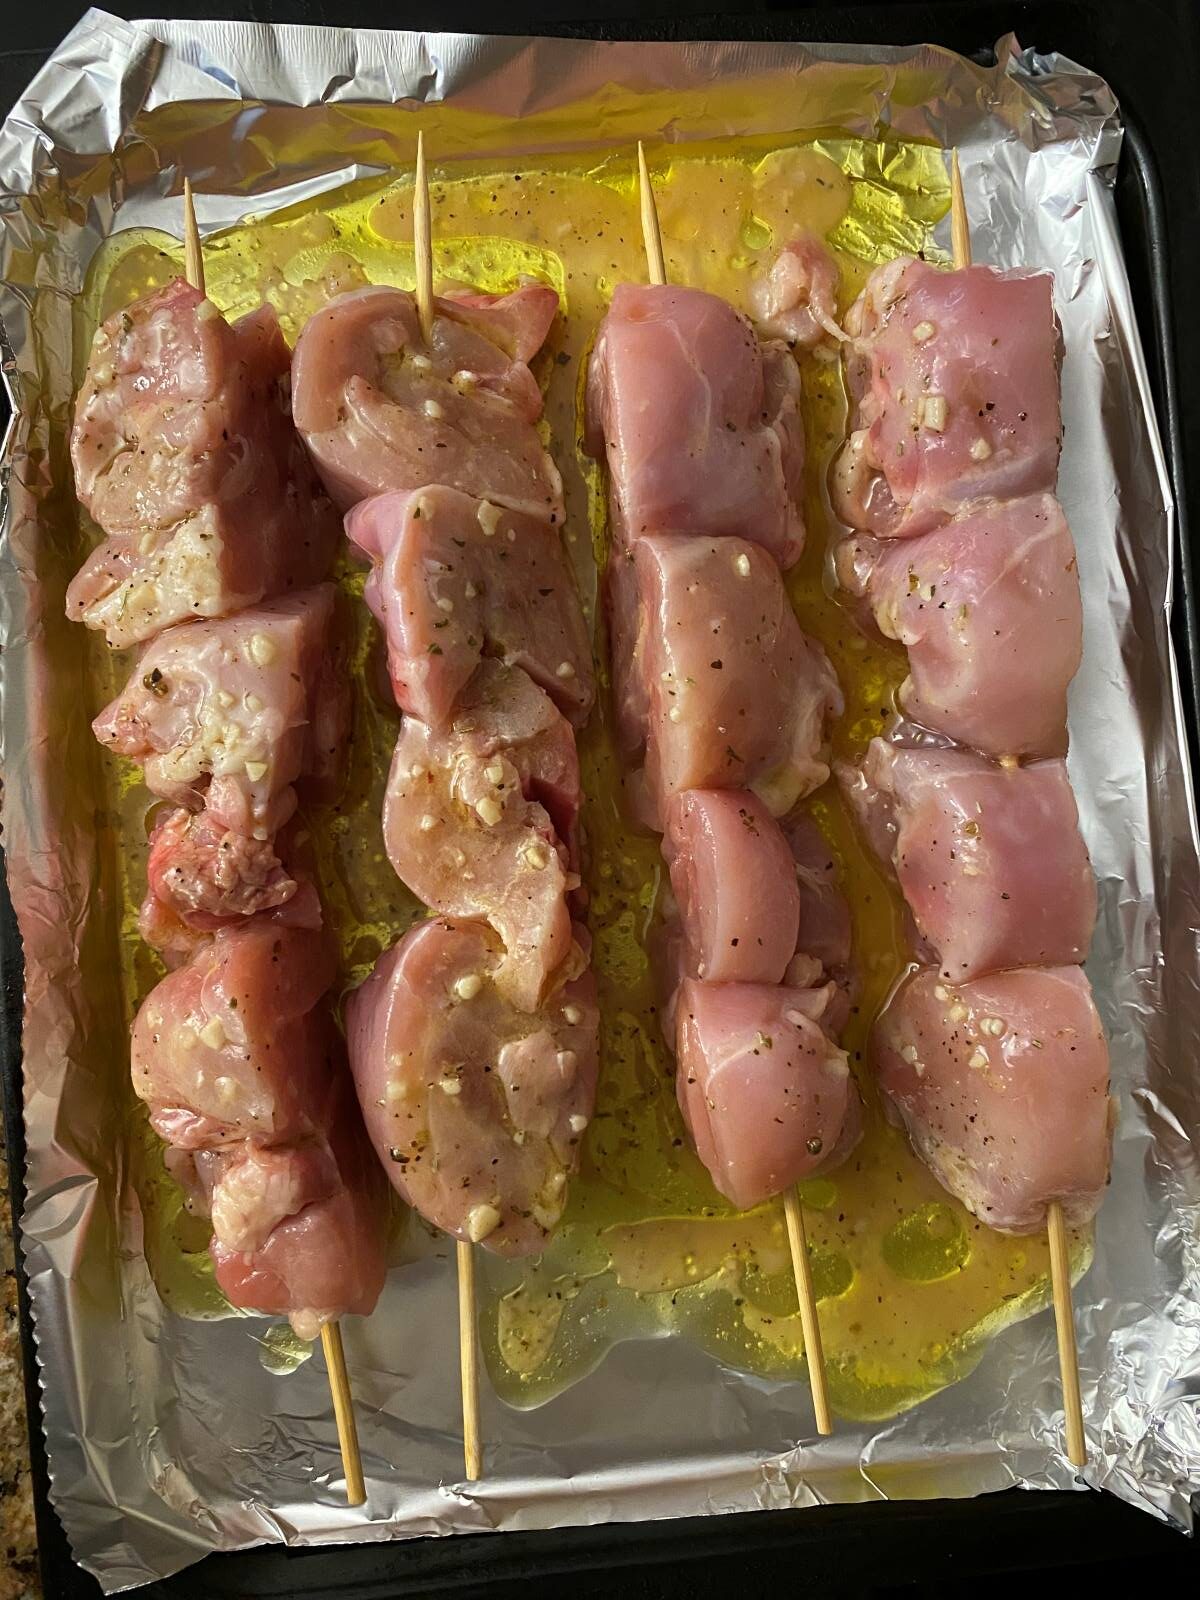 marinated chicken on 4 skewers in a baking tray